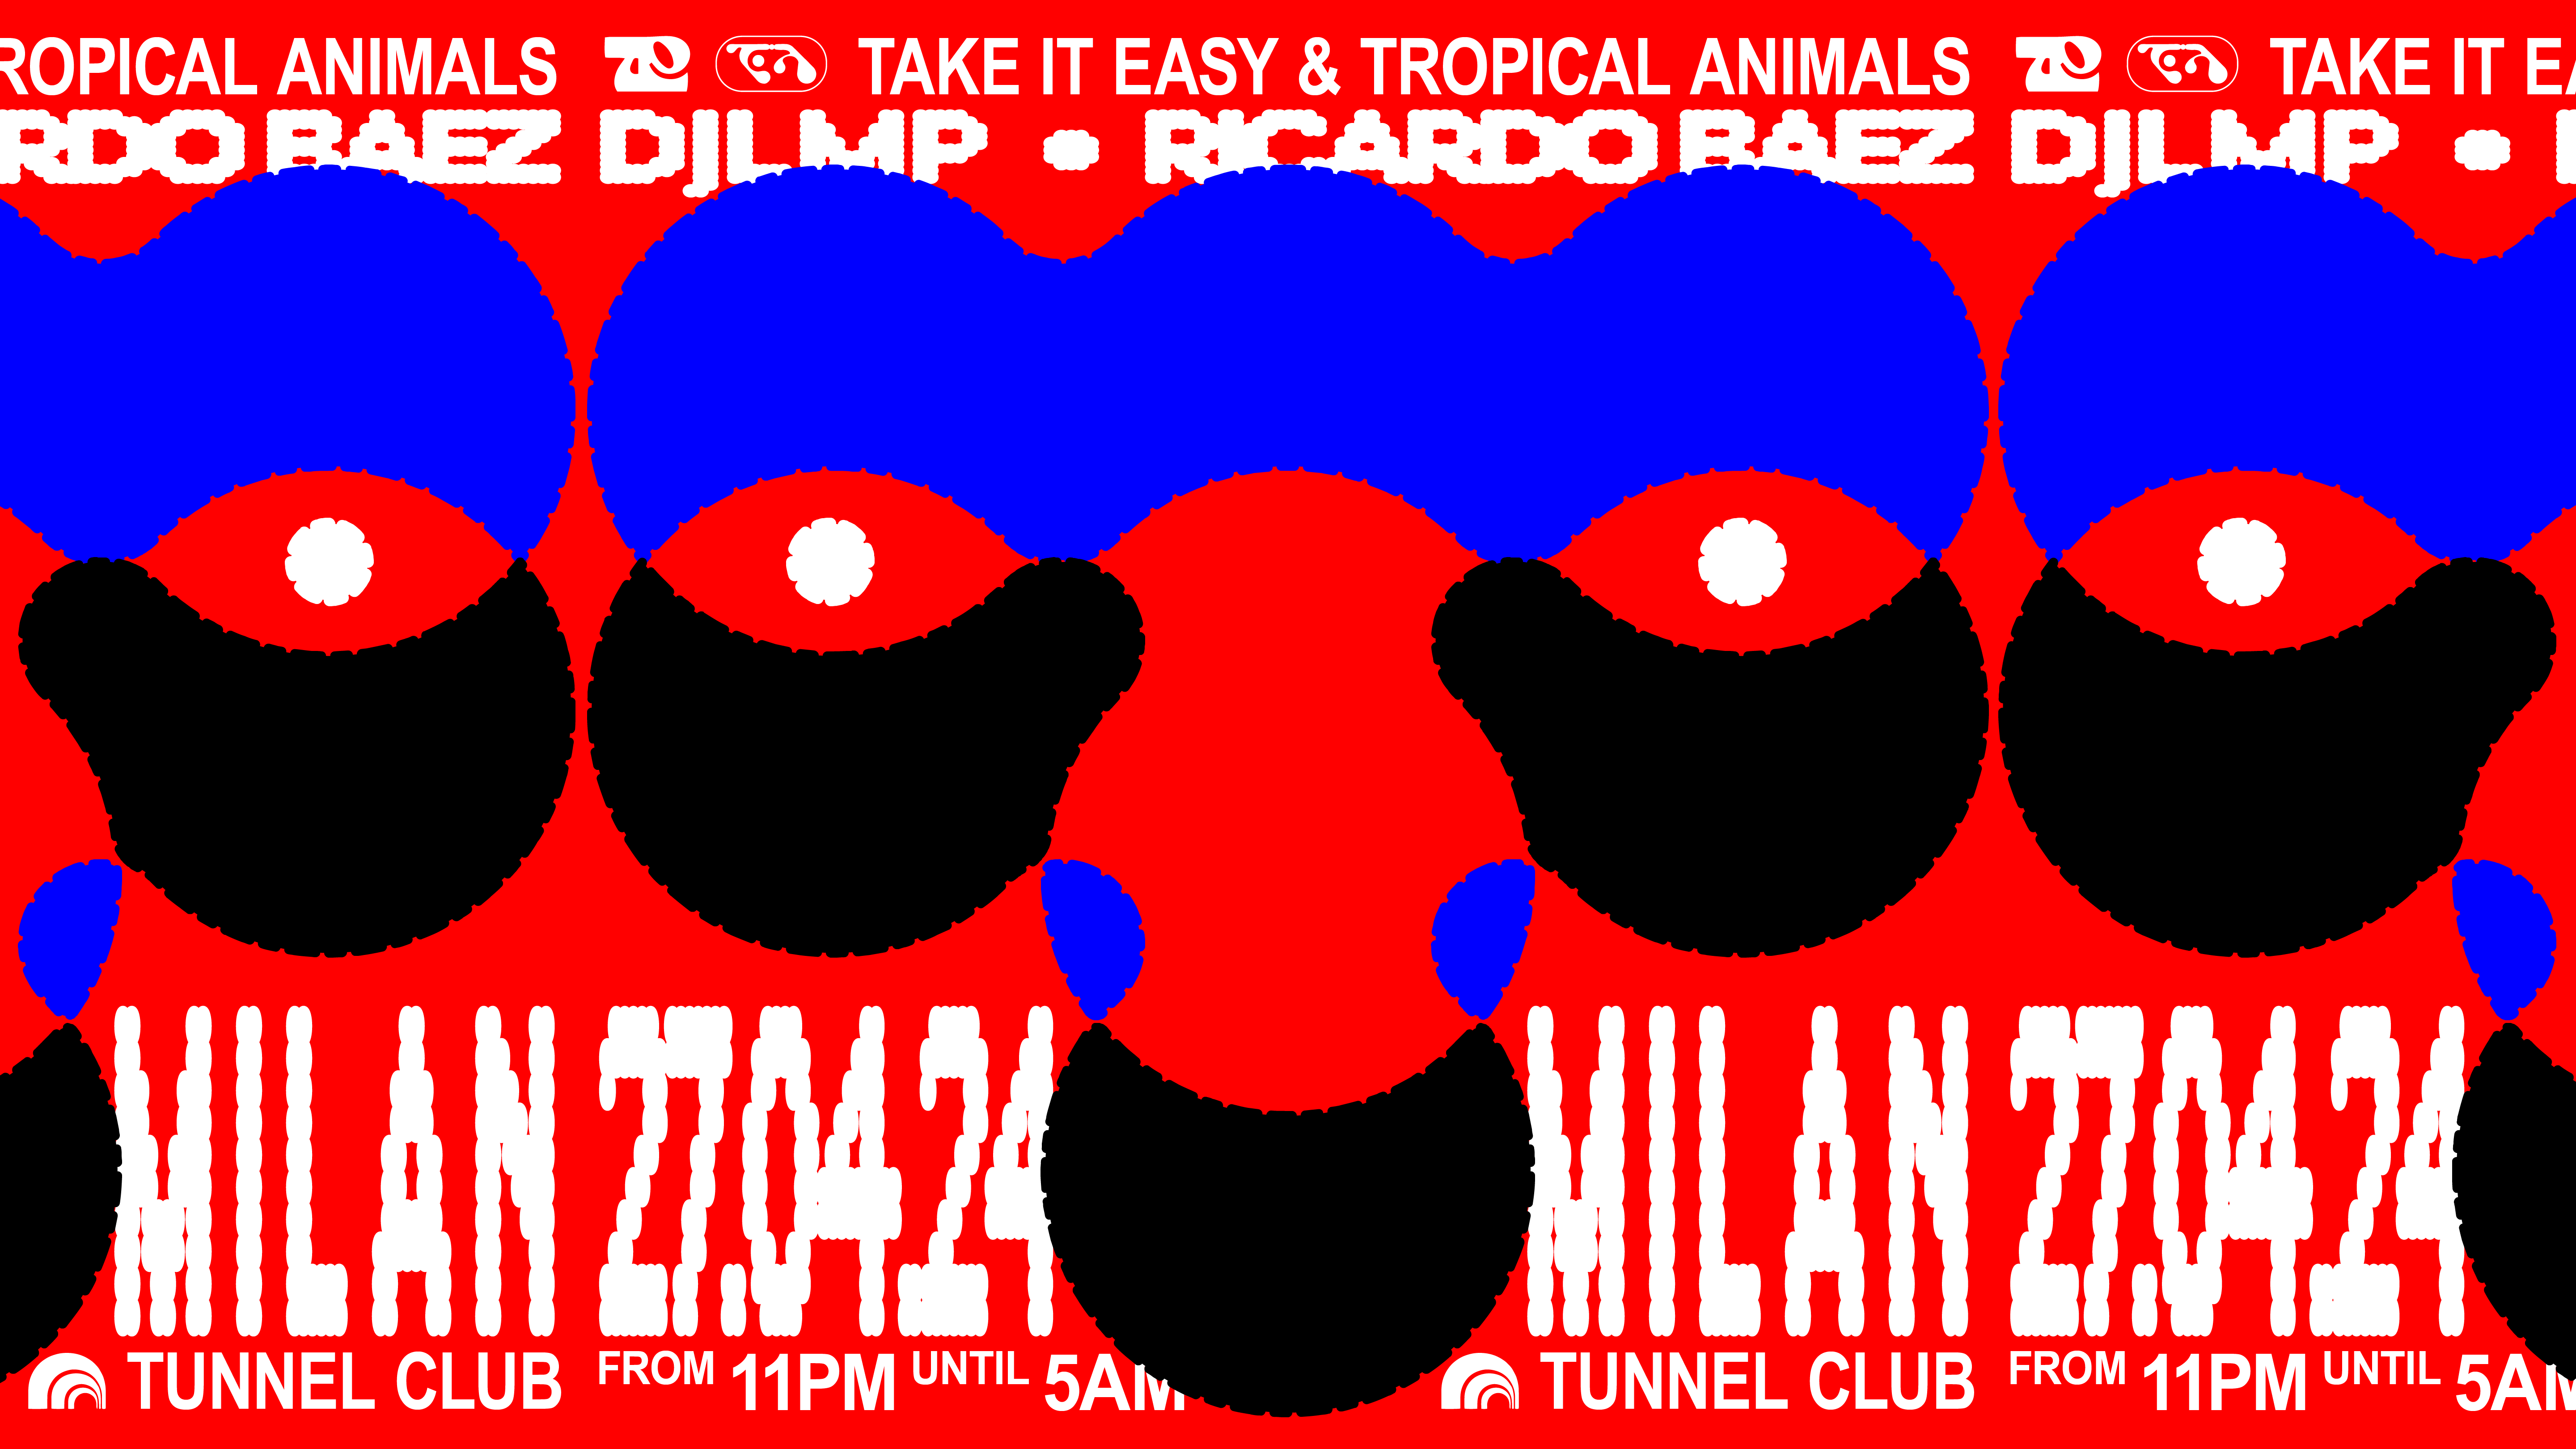 Tropical Animals meets Take It Easy with Ricardo Baez and DJLMP - Página frontal